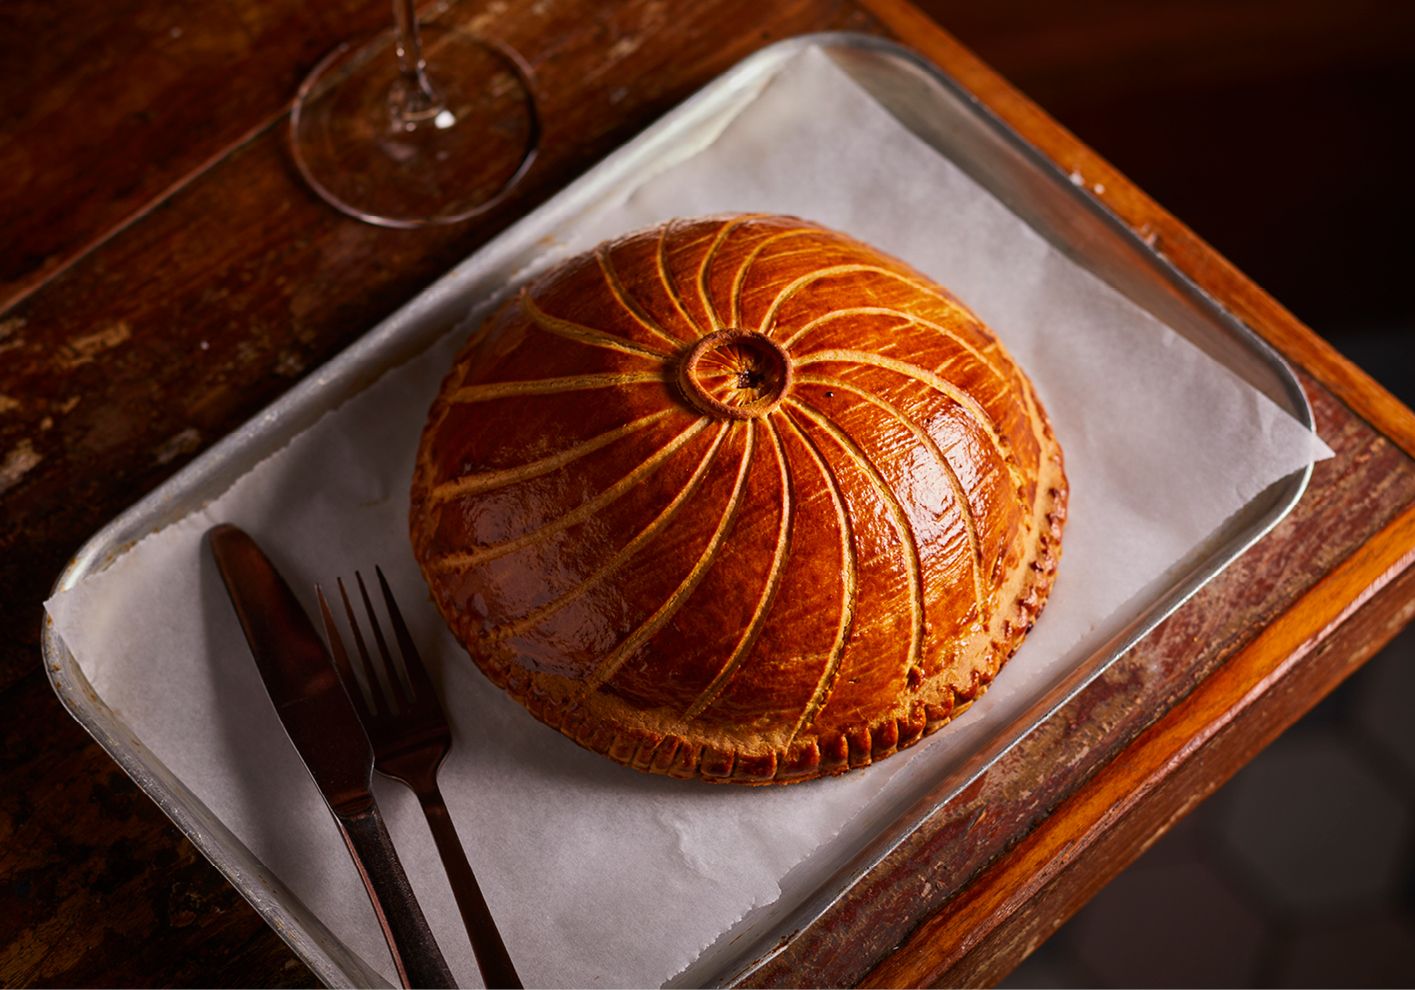 The festive pithivier, filled with duck breast and foie gras, is matched with an old-vintage chianti from the Colli Senesi appellation